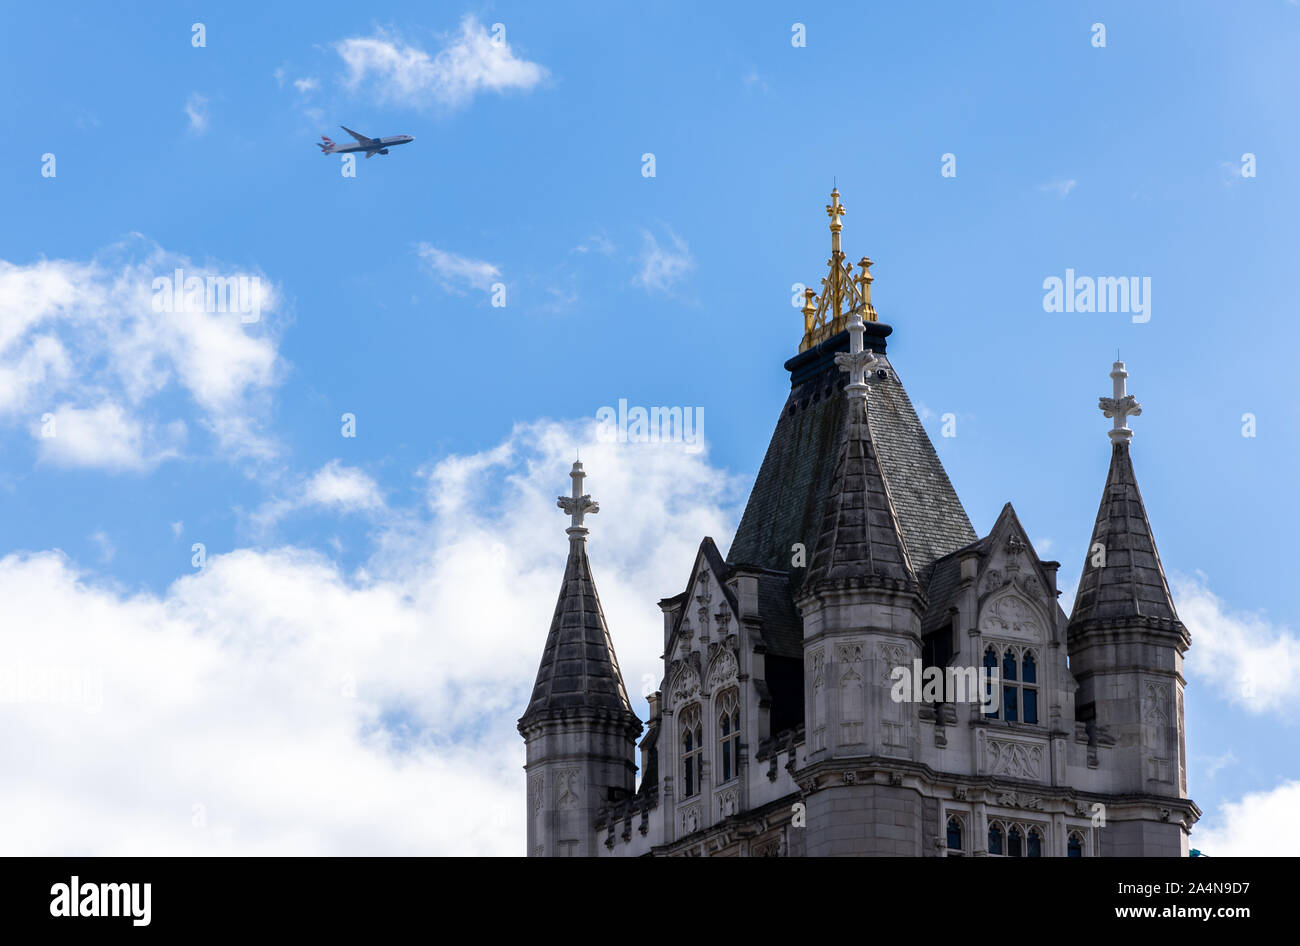 An airplane flying over the Tower Bridge of London,UK. Airplane low pass over London Stock Photo